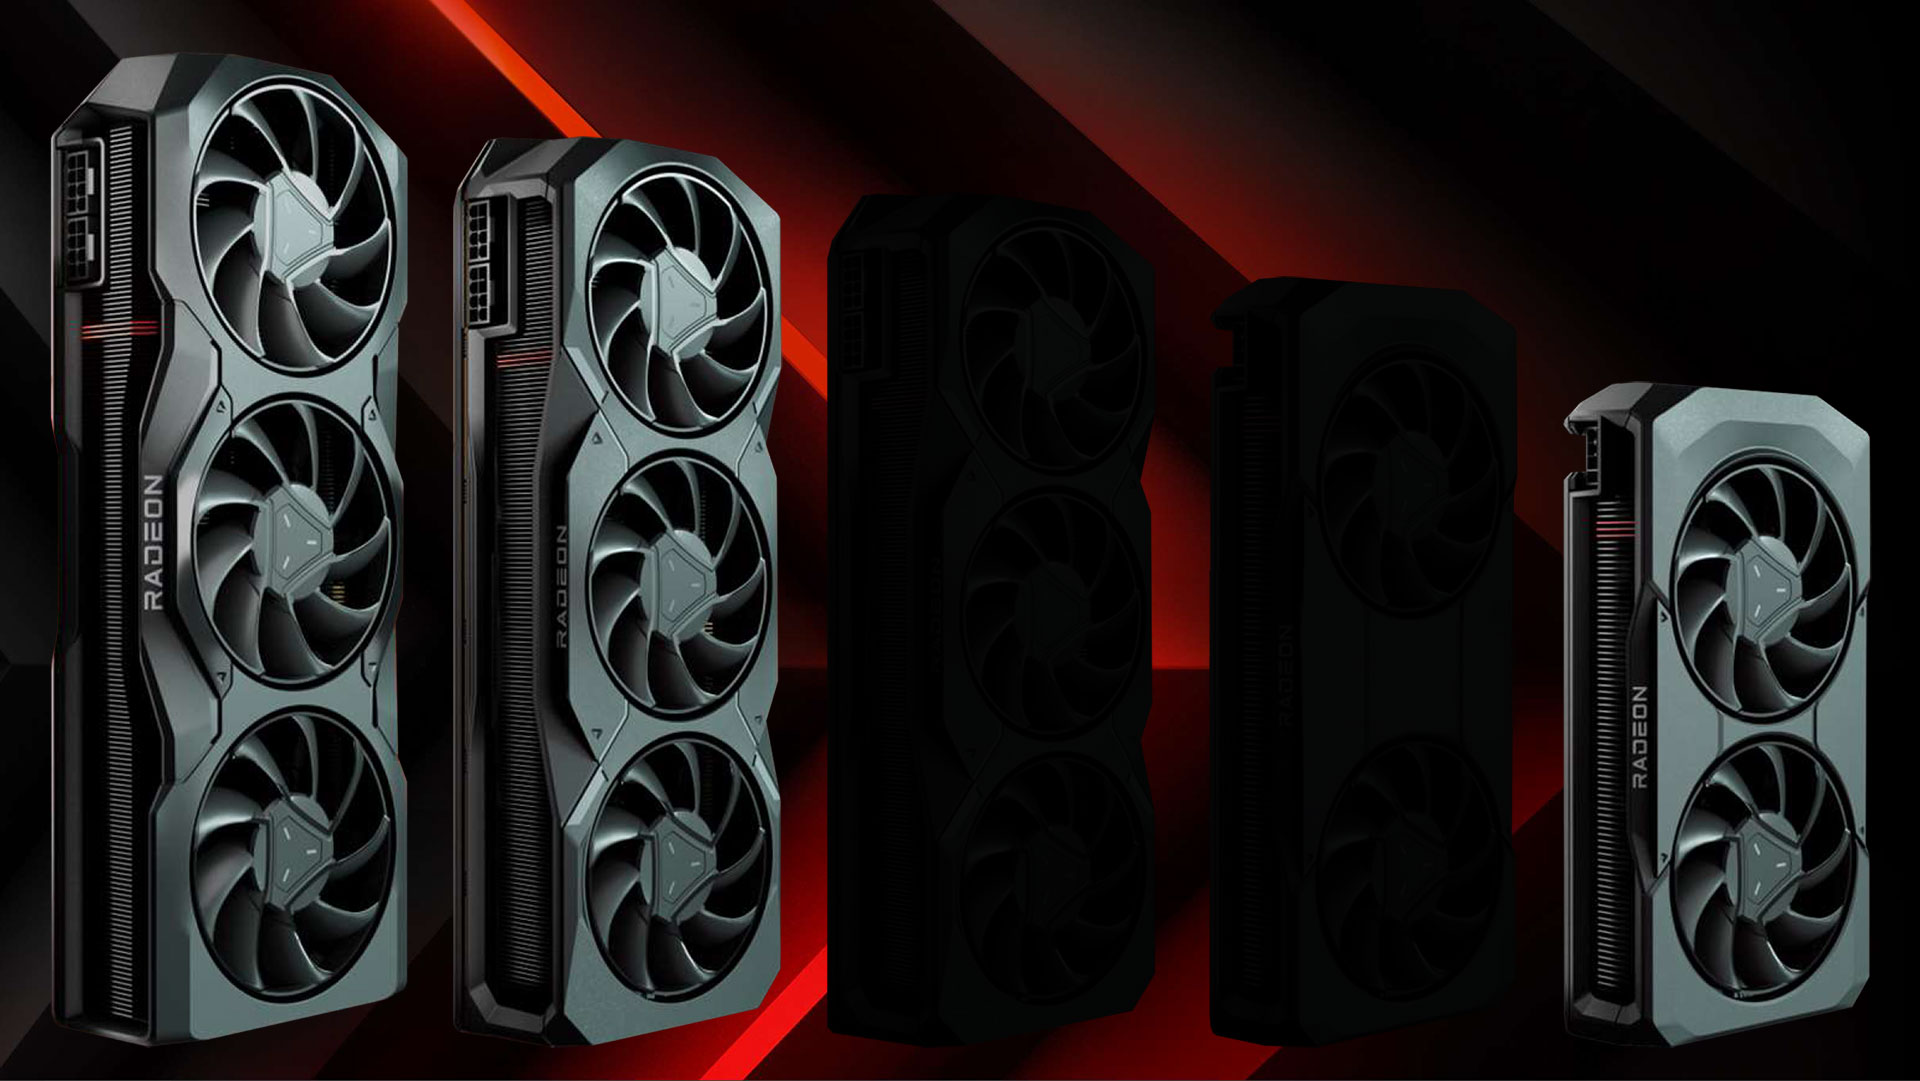 Watch AMD unveil the Radeon RX 7800 XT and RX 7700 XT right here at 11 am  EST / 8 am PT